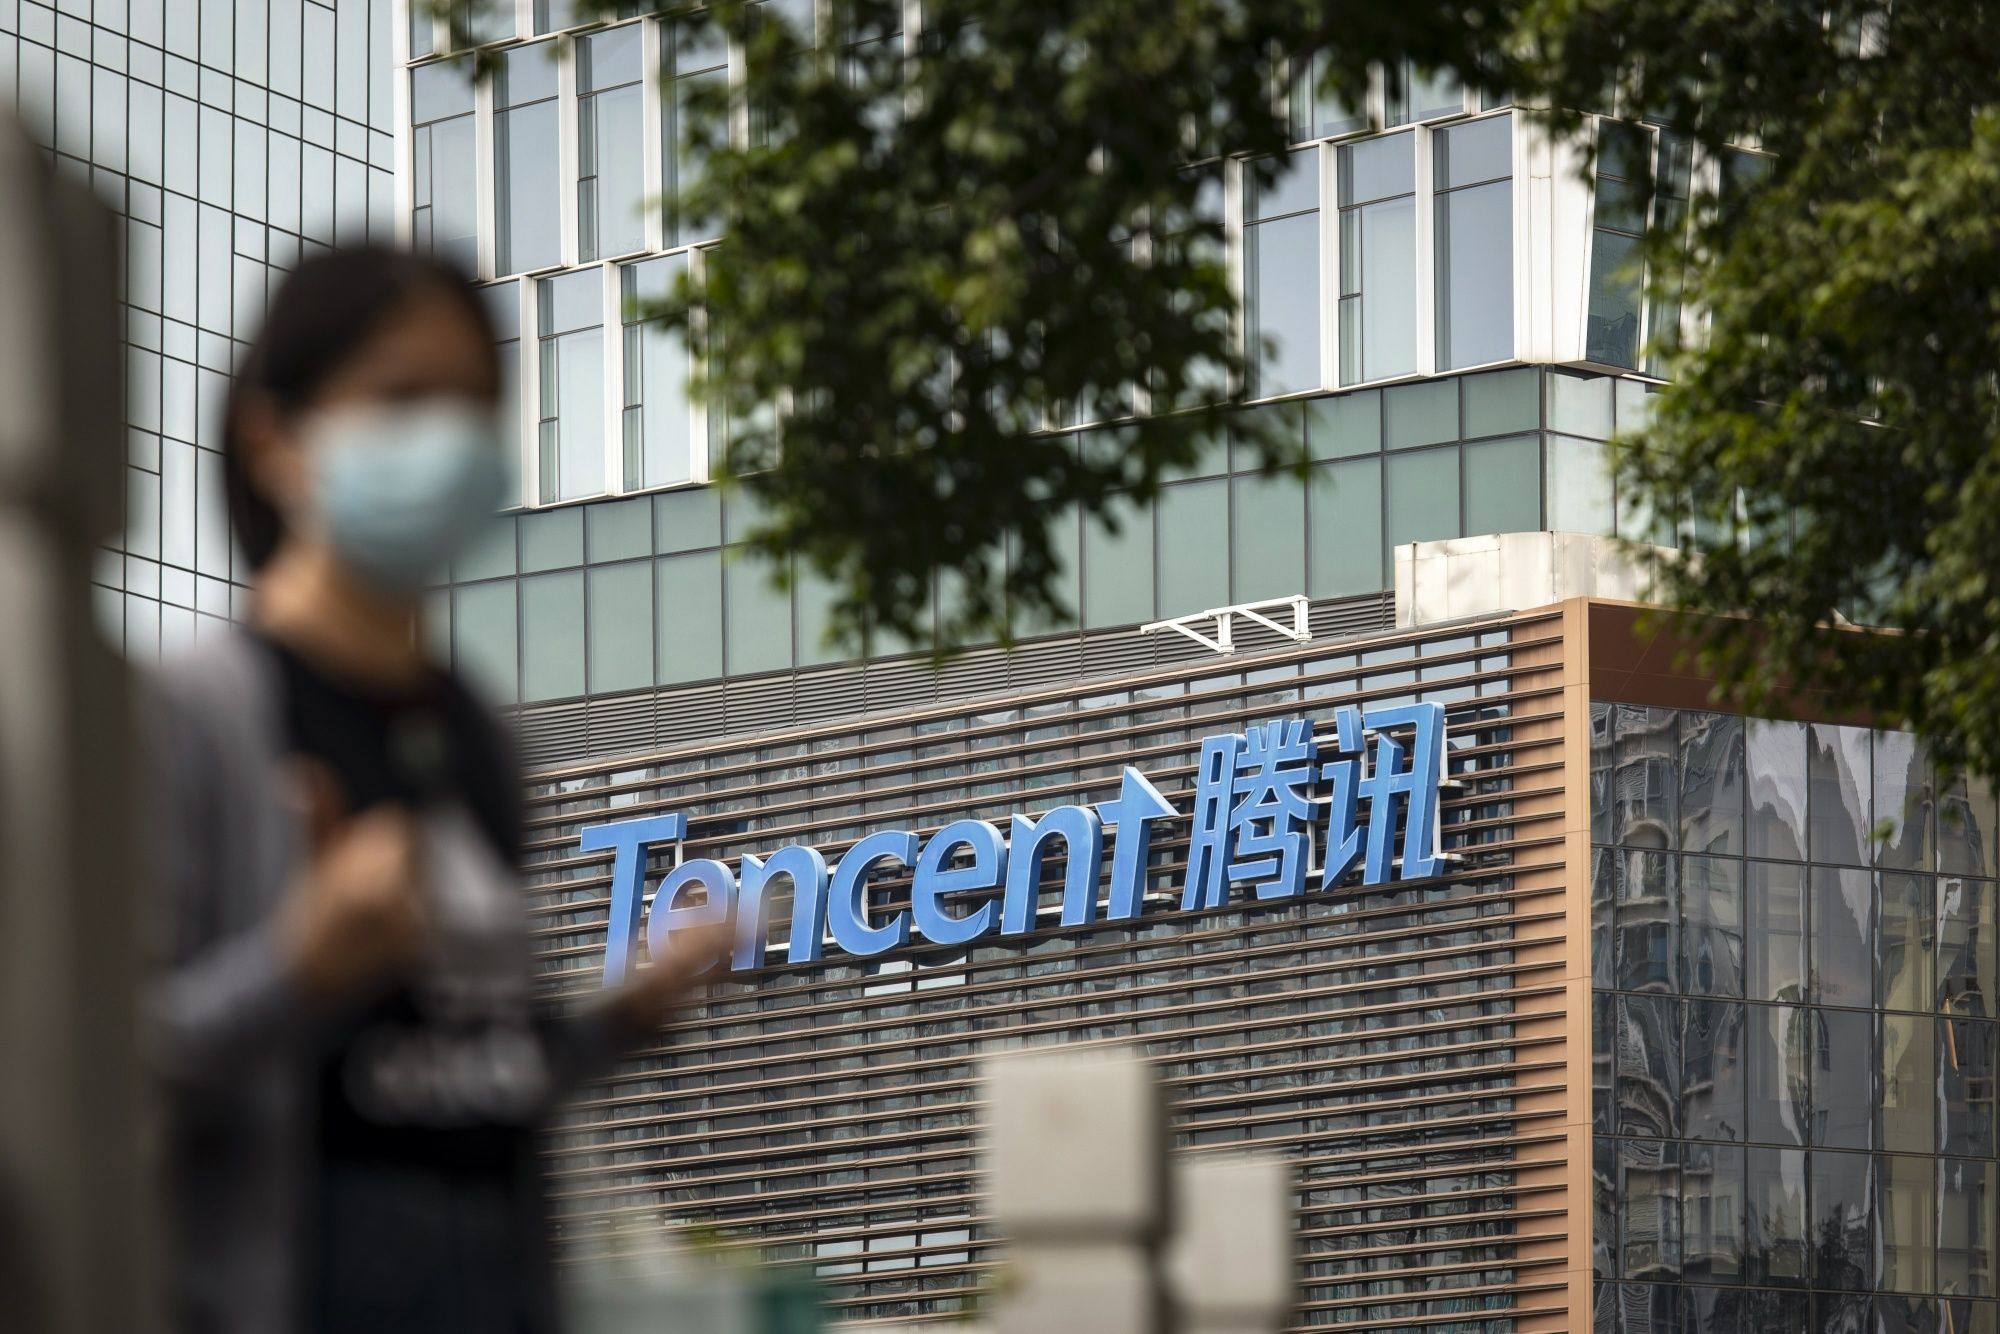 The Tencent headquarters in Shenzhen. The firm’s stock slumped by 14 per cent in the second quarter. Photo: Bloomberg